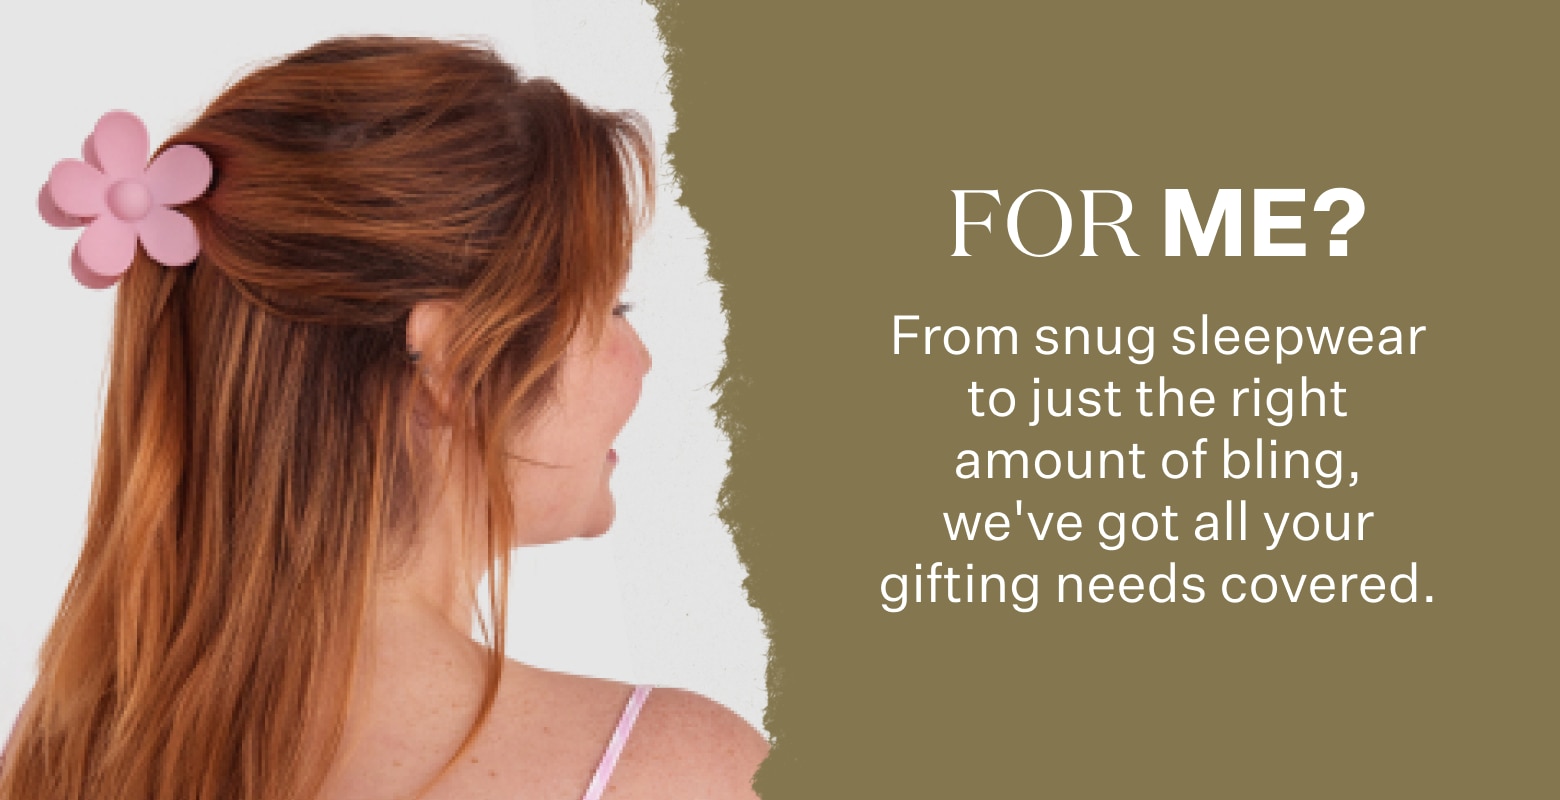 For Me? From snug sleepwear to just the right amount of bling, we've got all your gifting needs covered.